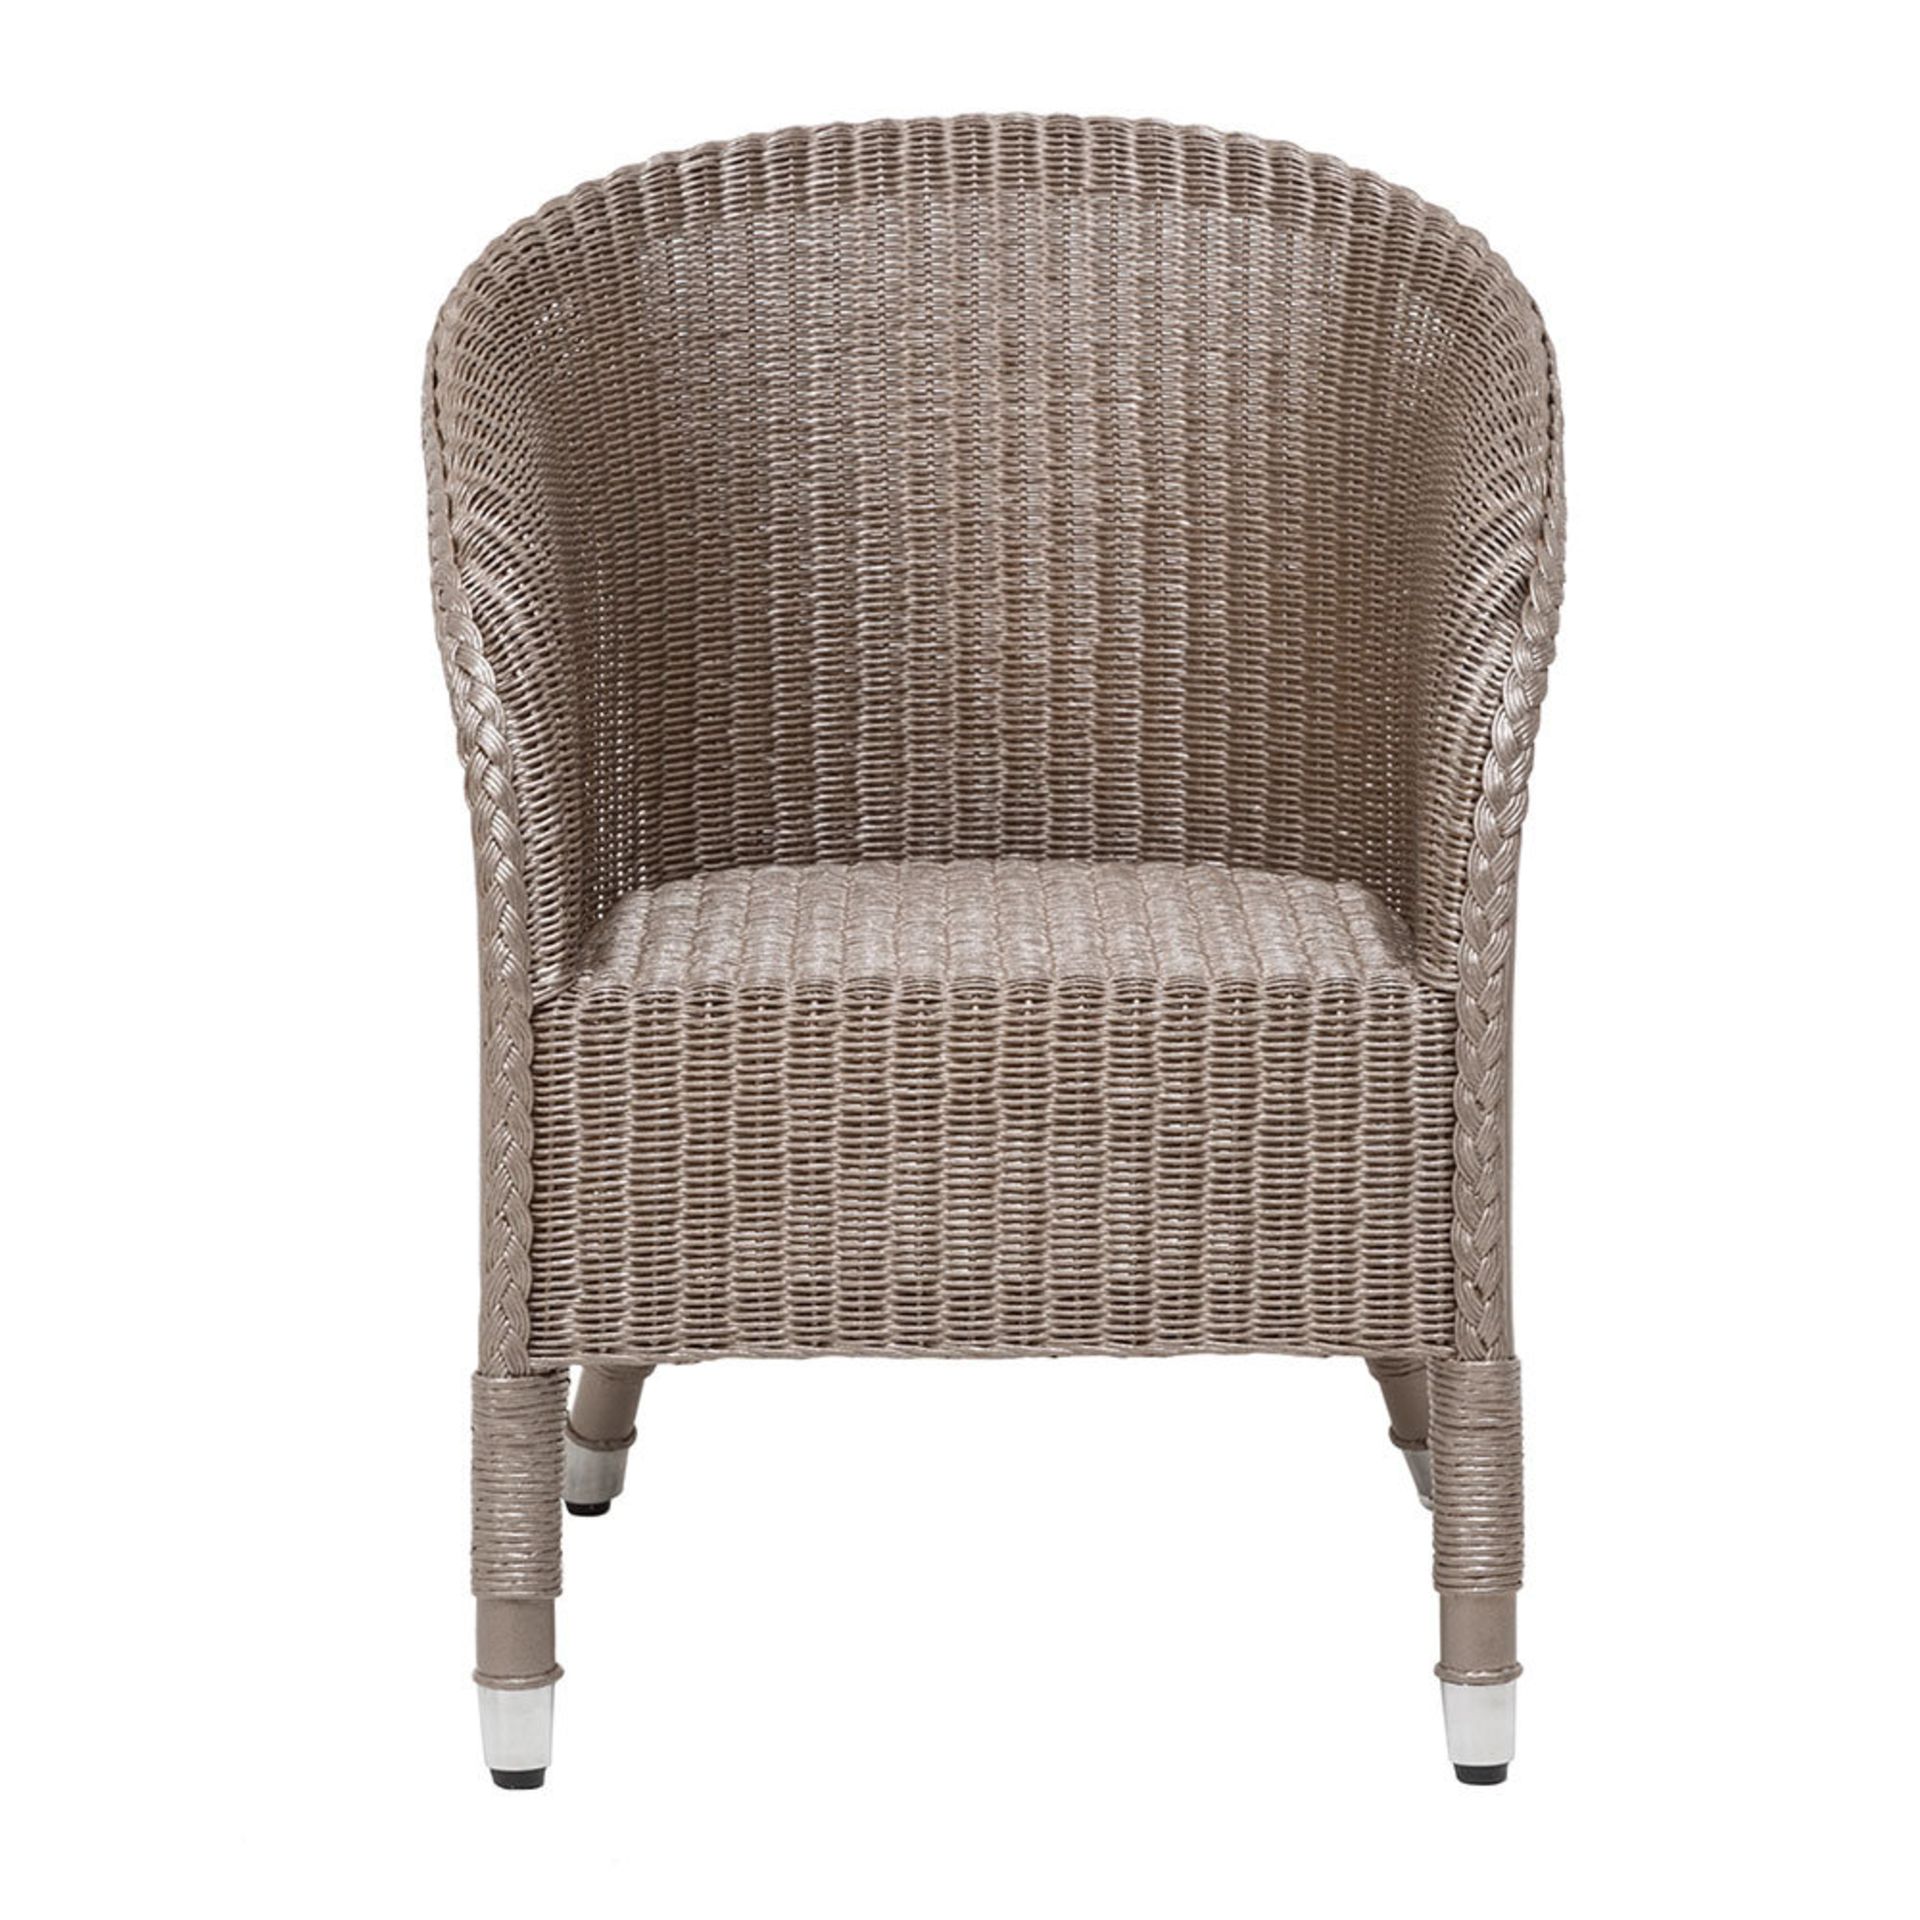 1 x Adorable Childrens Pookie Armchair - Lloyd Loom Weave on a Bent Wood Frame - RRP £275! - Image 3 of 5